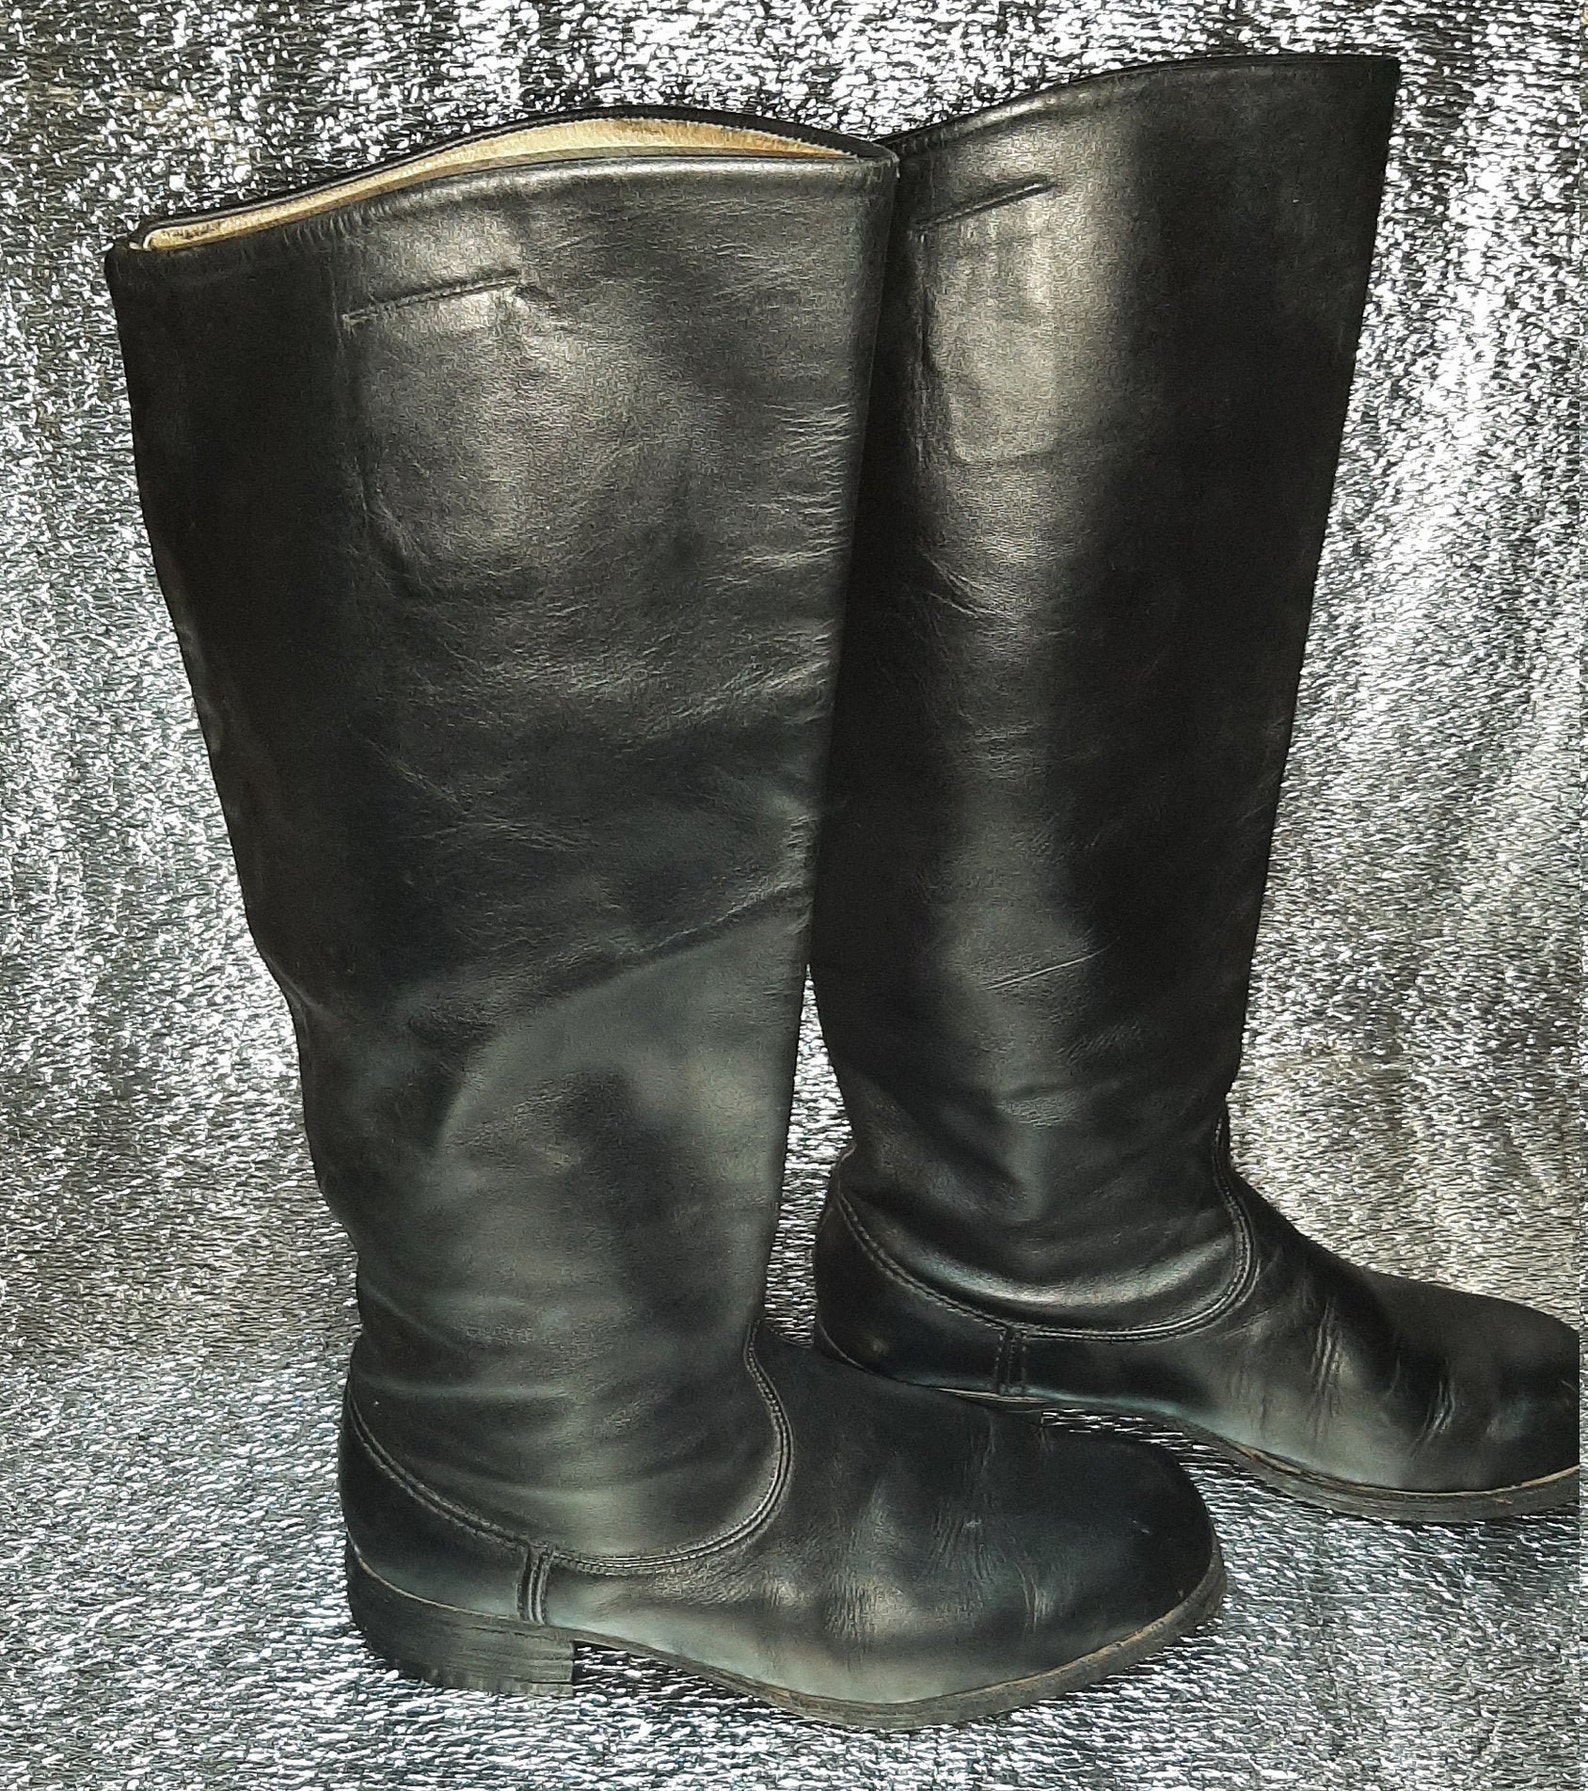 Military chrome boots Soviet army USSR | Etsy